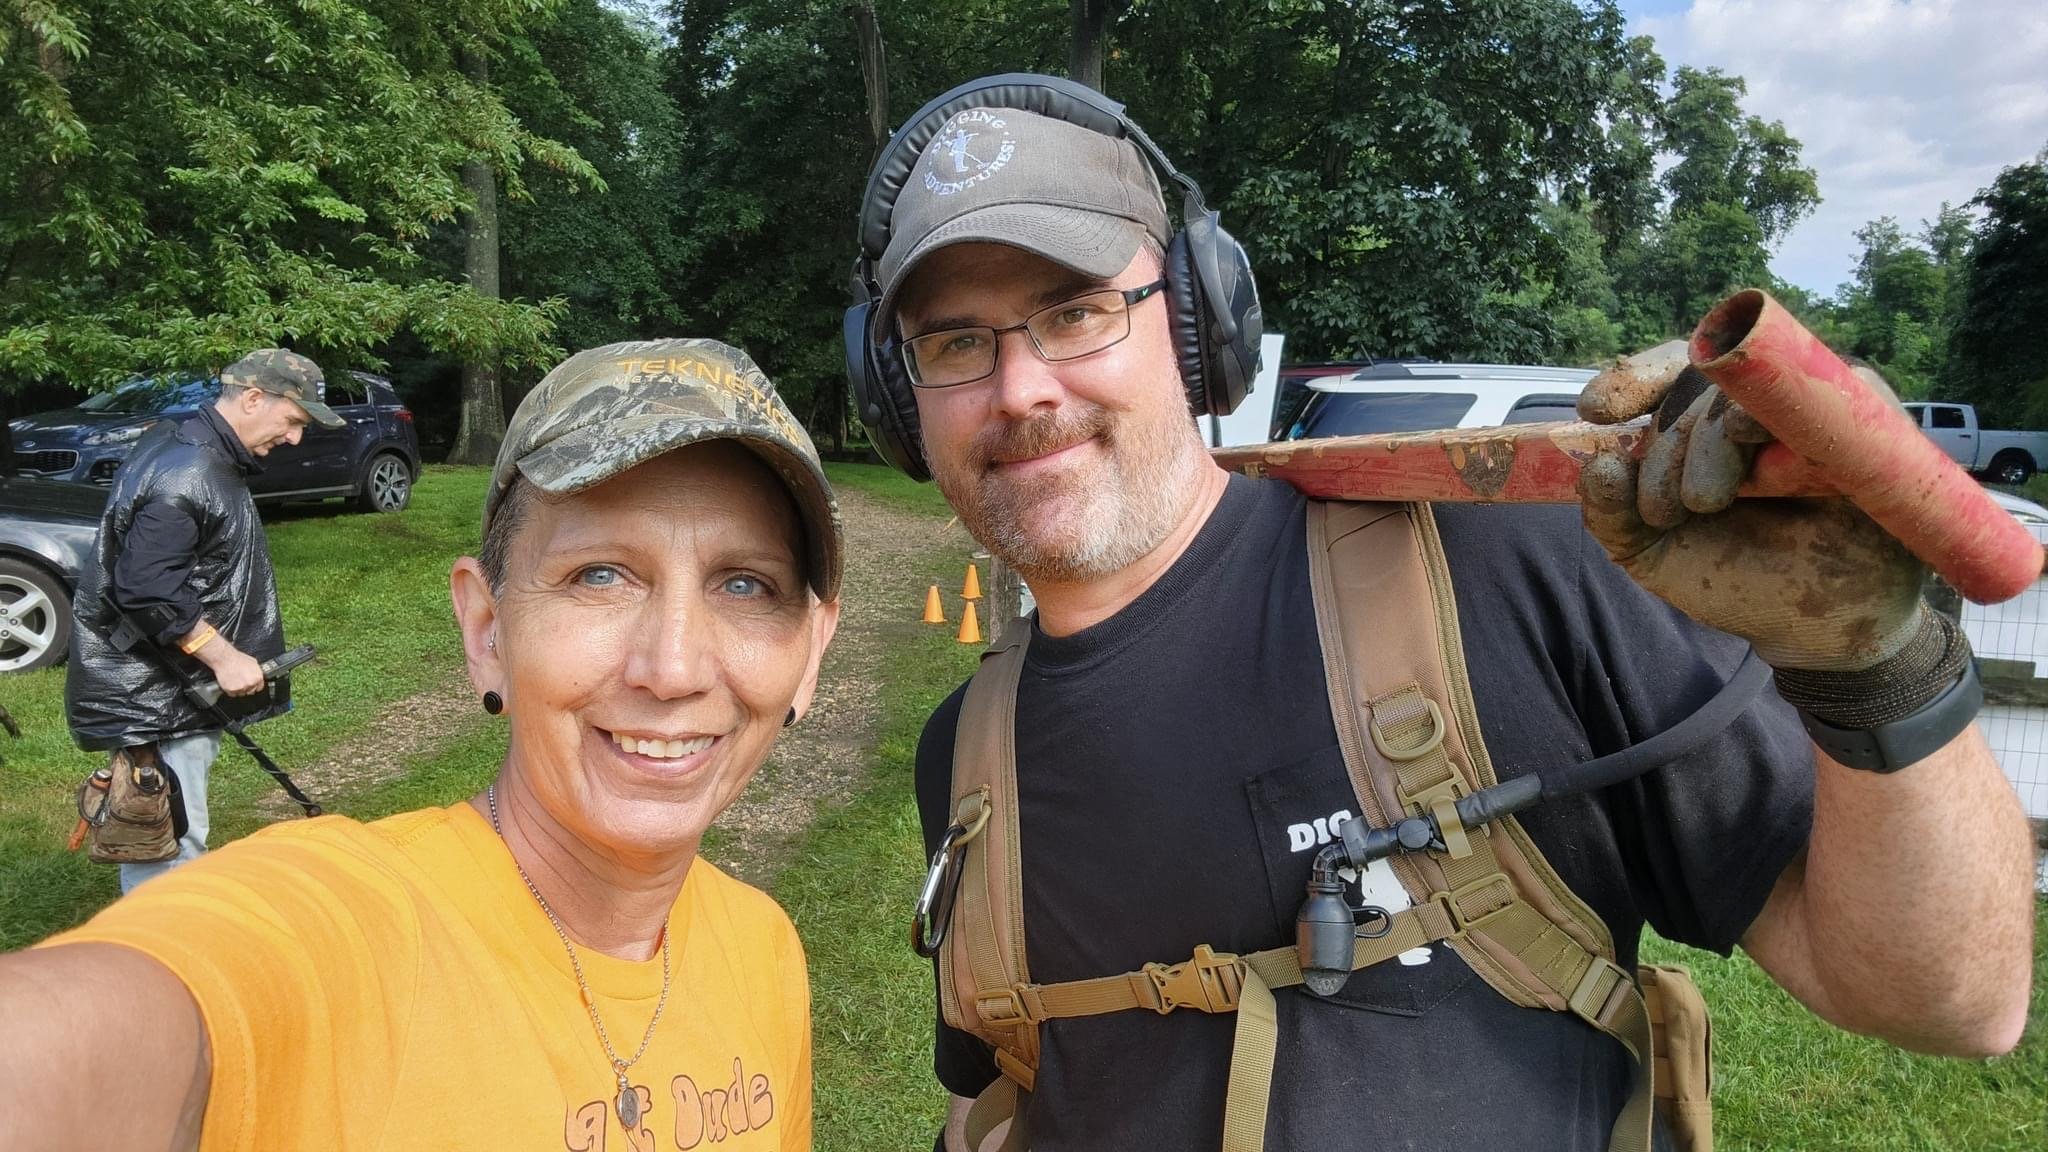 Audra Thomas with one of the detectorists